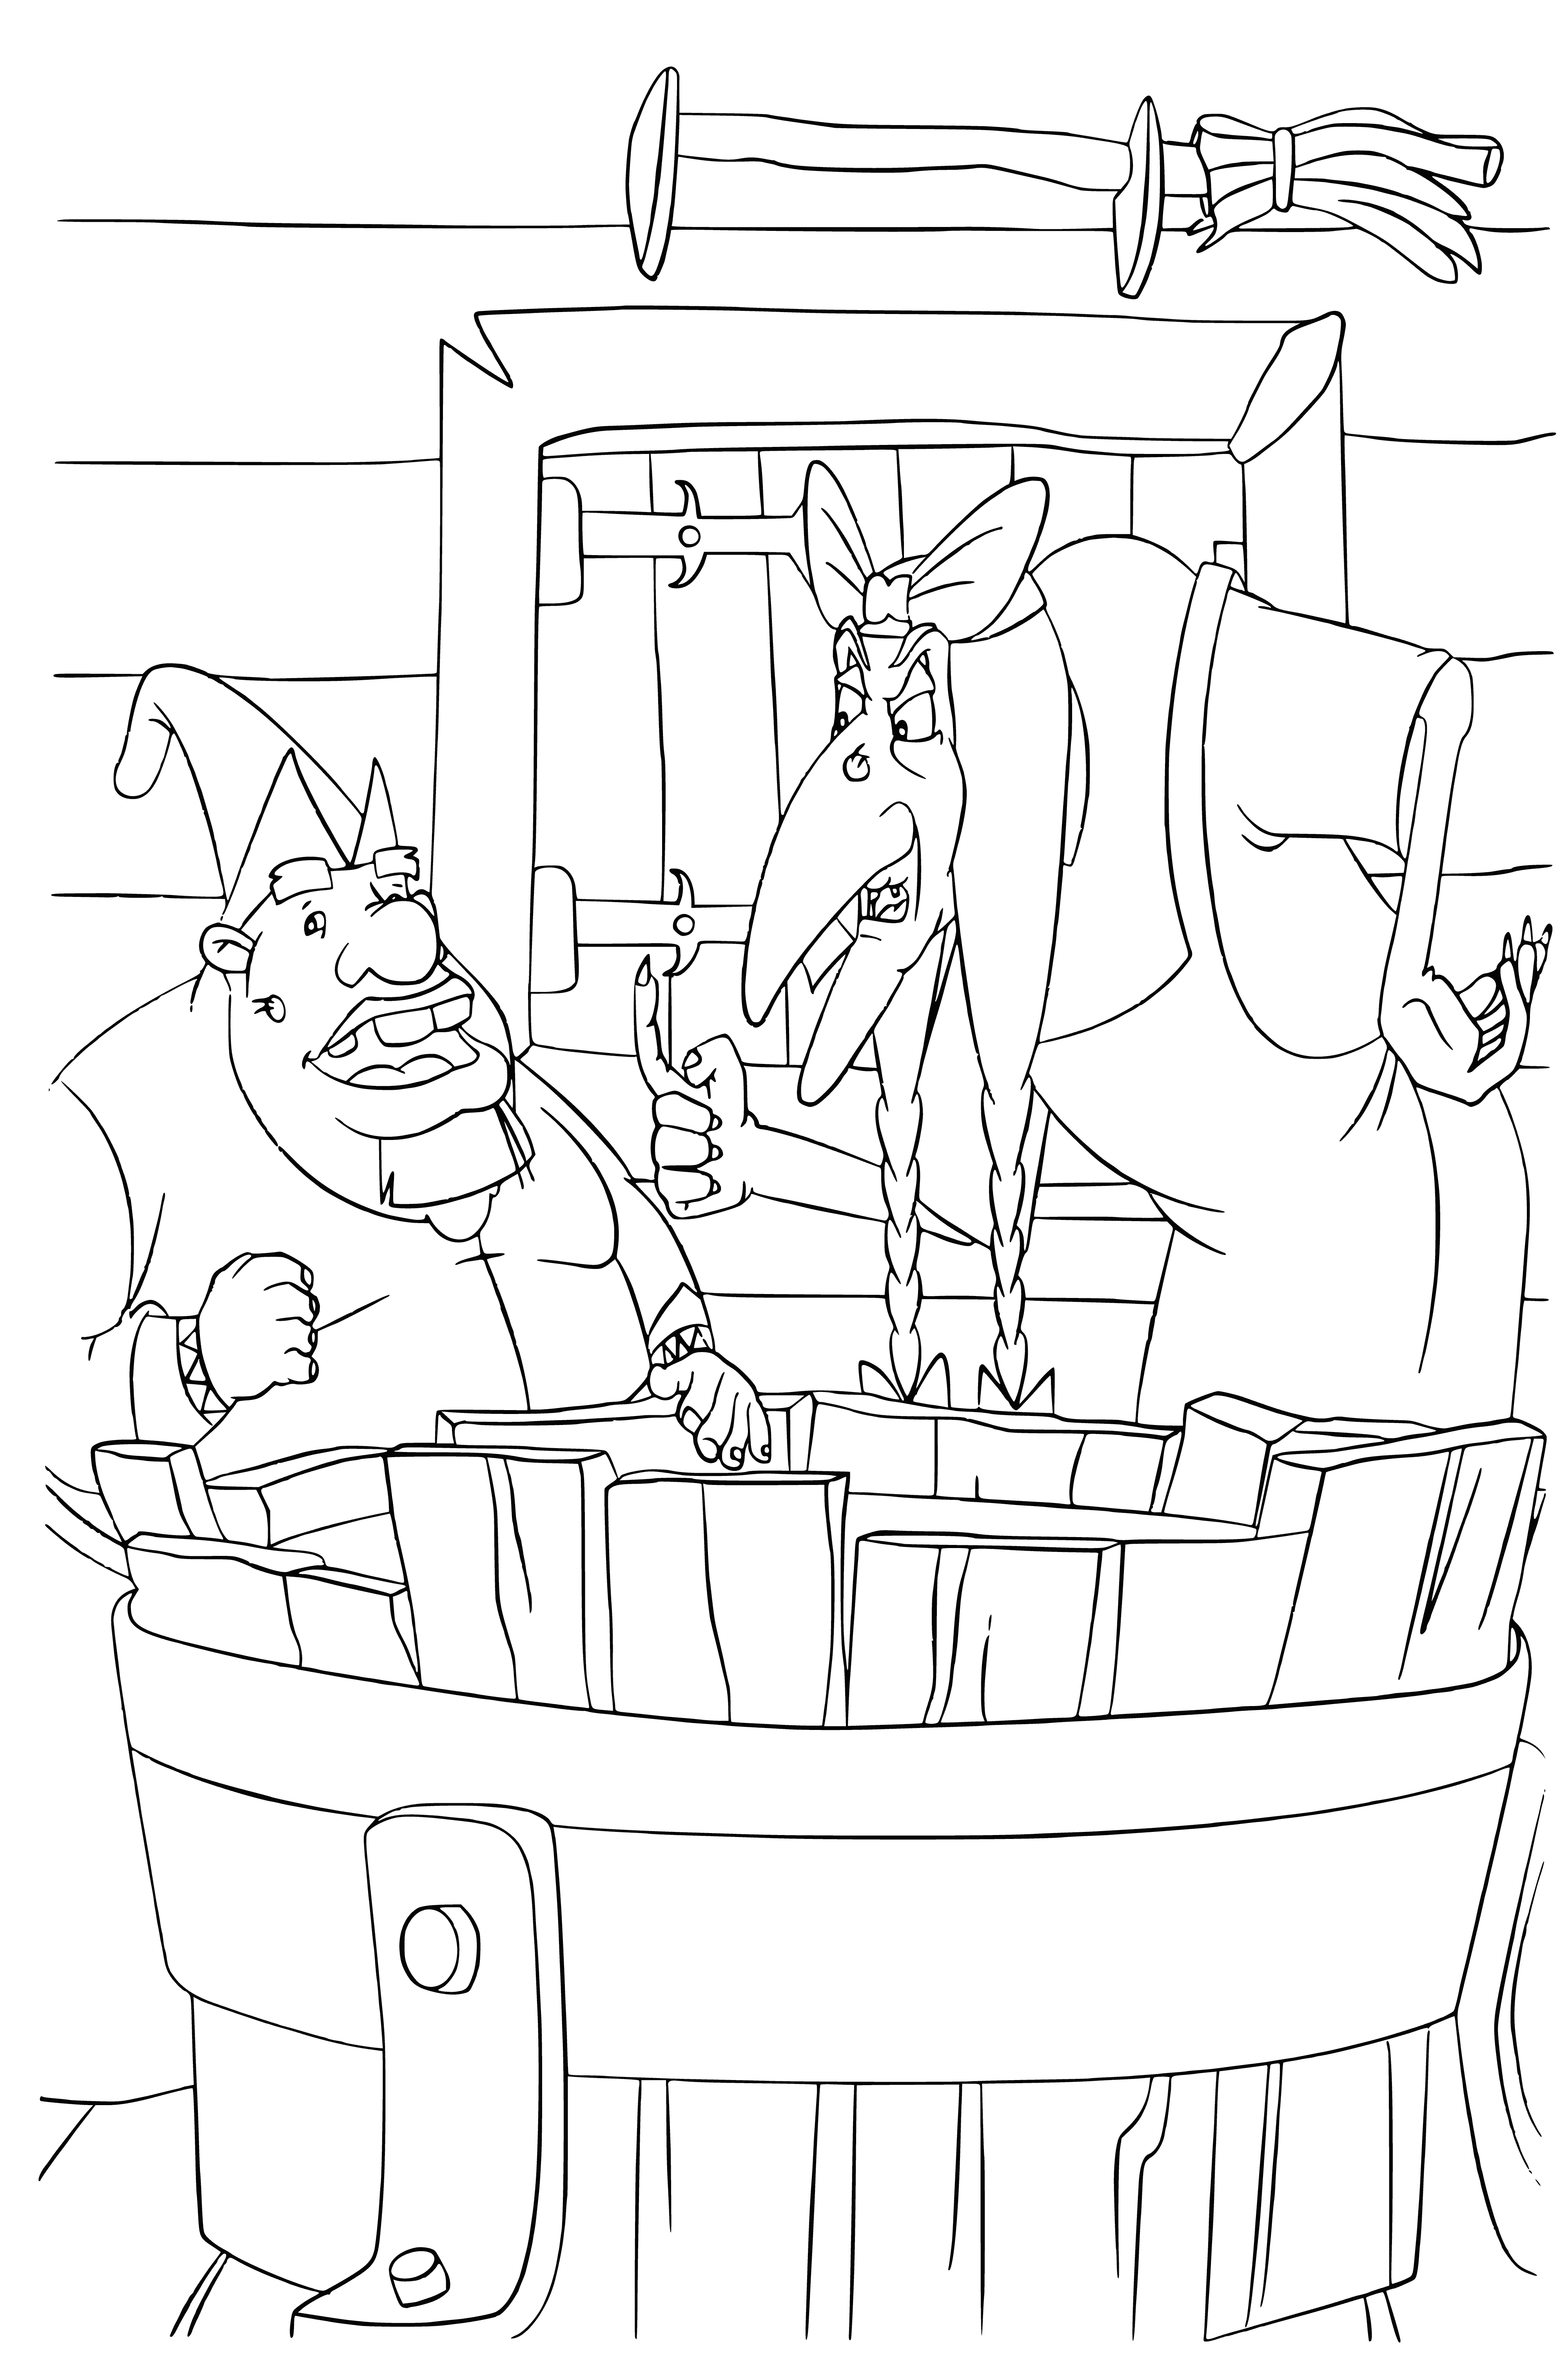 coloring page: Russian folk hero Dobrynya Nikitich battles the serpent Gorynych, with Baba-yaga's hut on chicken legs in the background. Smoke billows and Baba-yaga peers out the window.